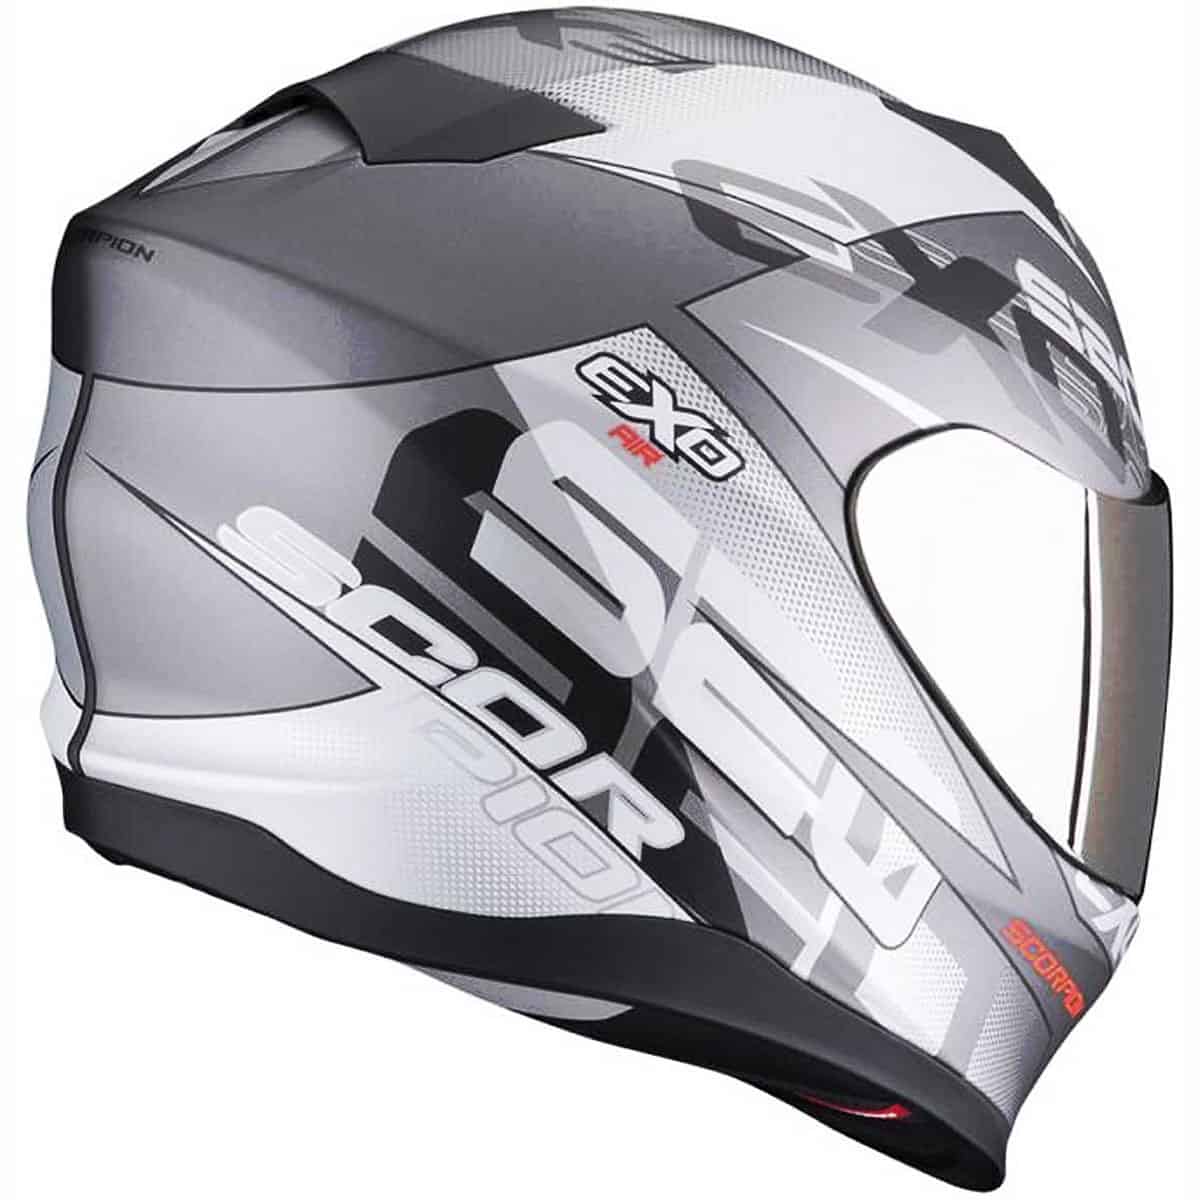 Clear vision in any condition with the Scorpion Exo-520 helmet: Enjoy a stylish fog-free ride with Pinlock 100% Max Vision technology3